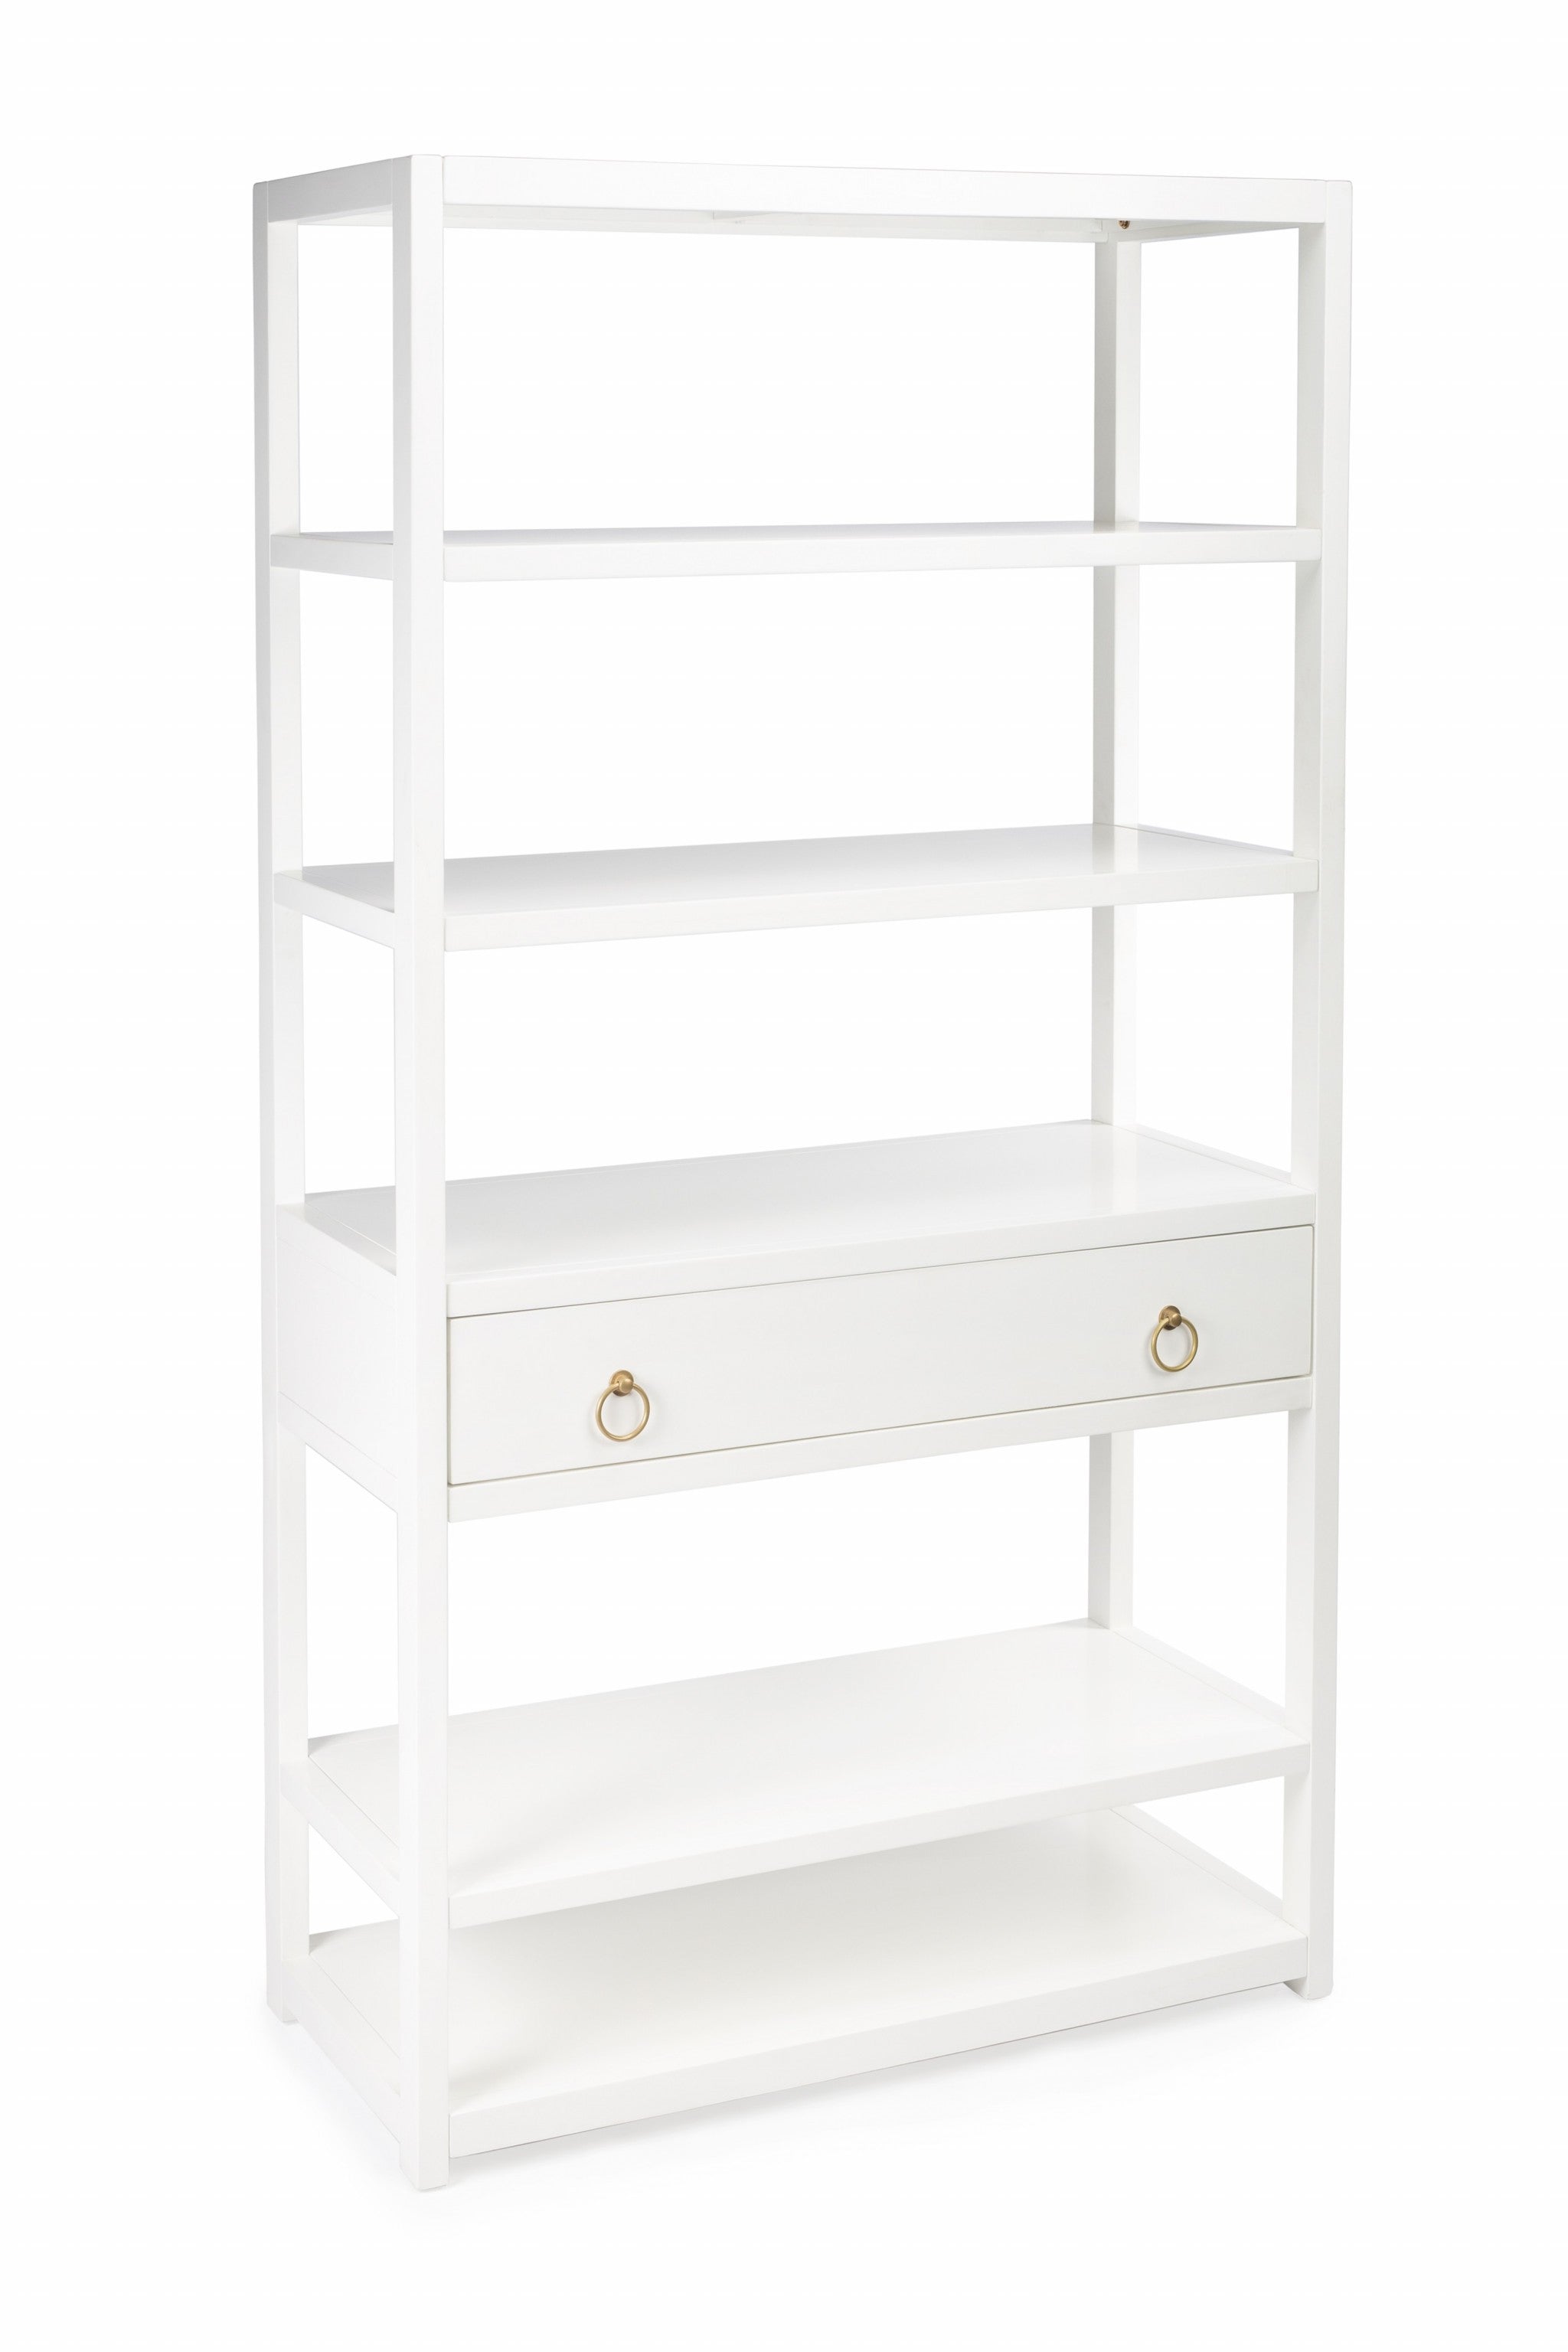 70" White Five Tier Standard Bookcase With One Drawer